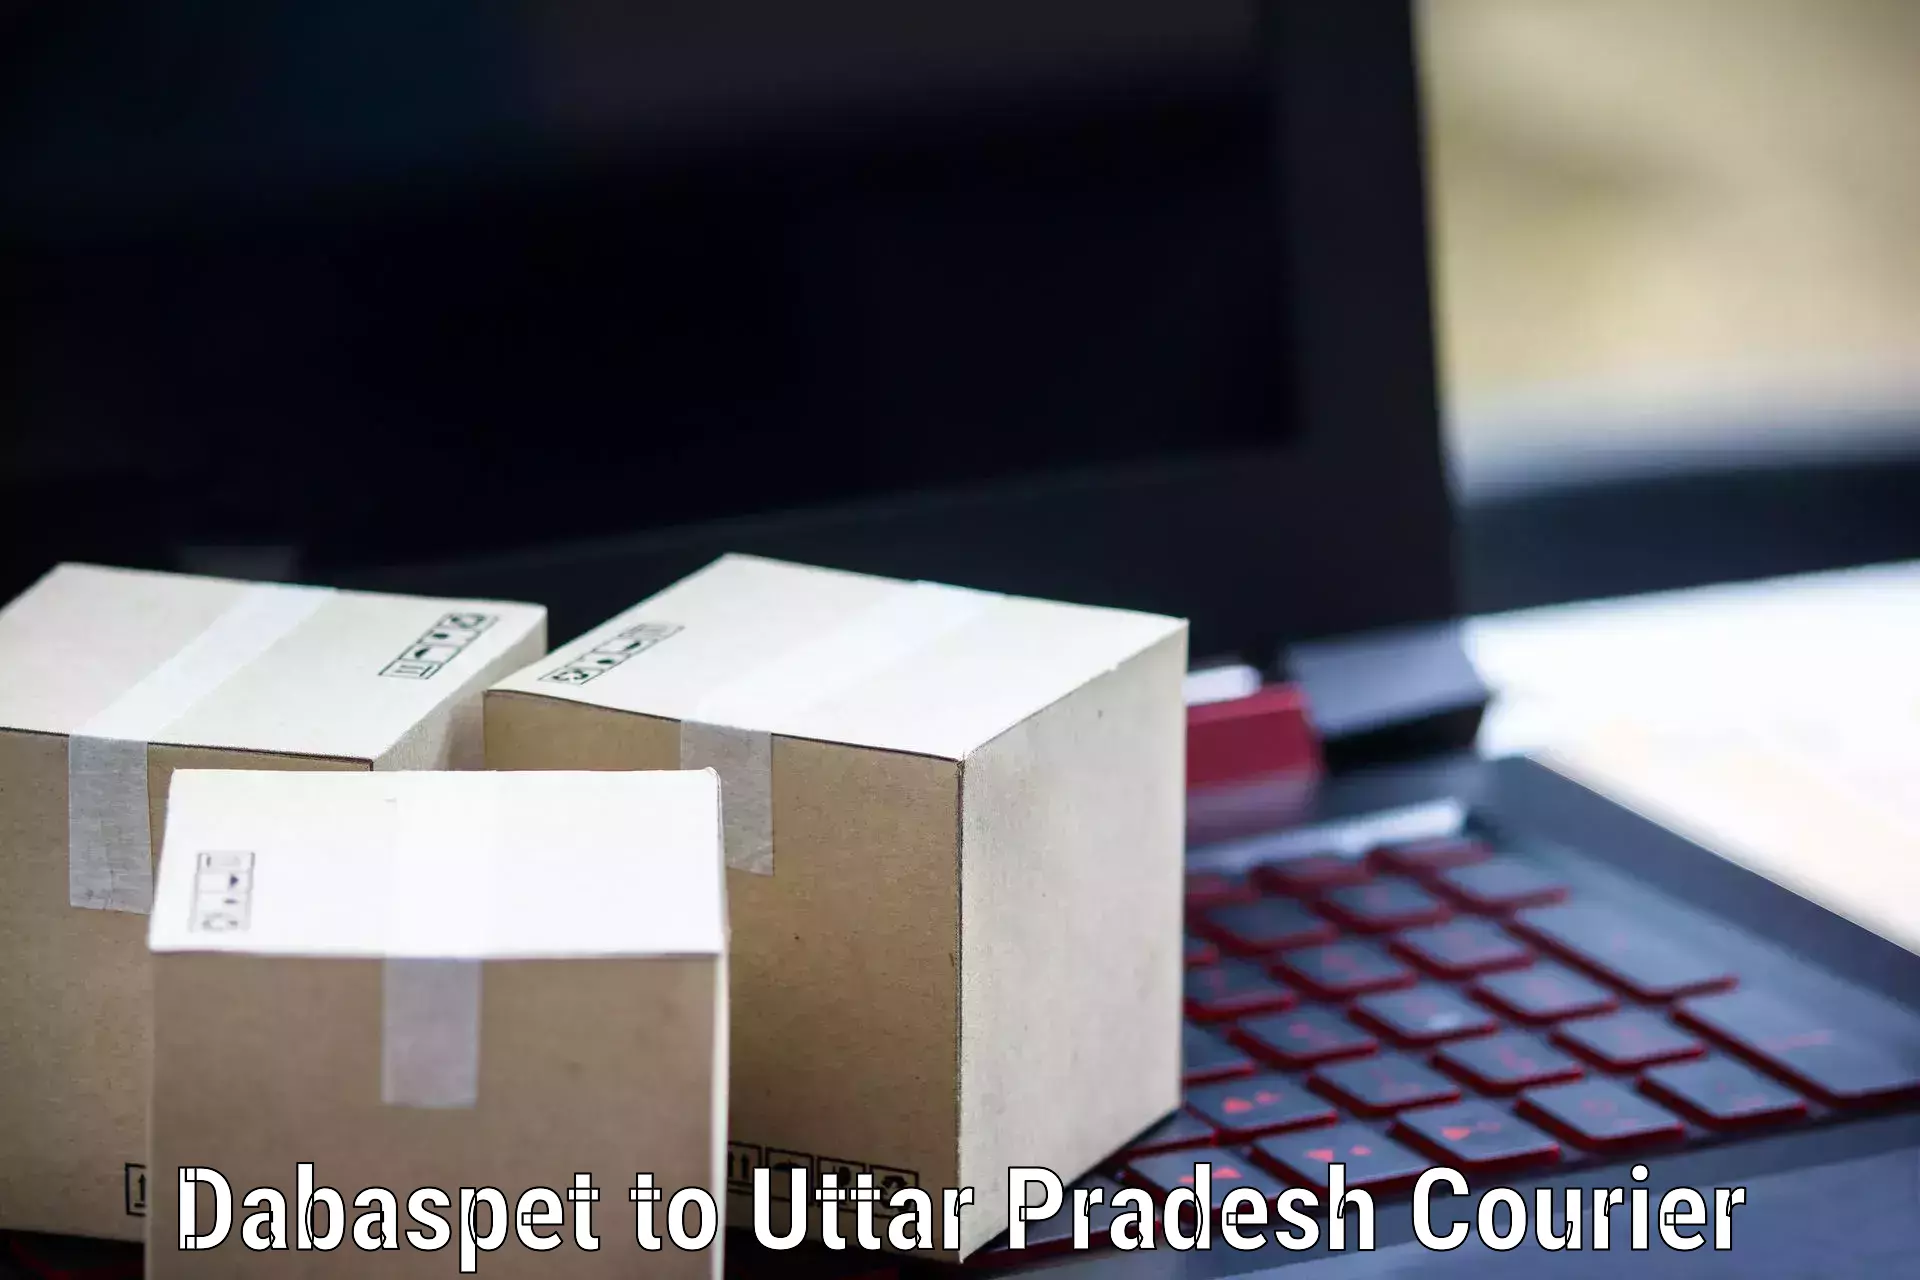 Professional courier handling Dabaspet to Shahjahanpur